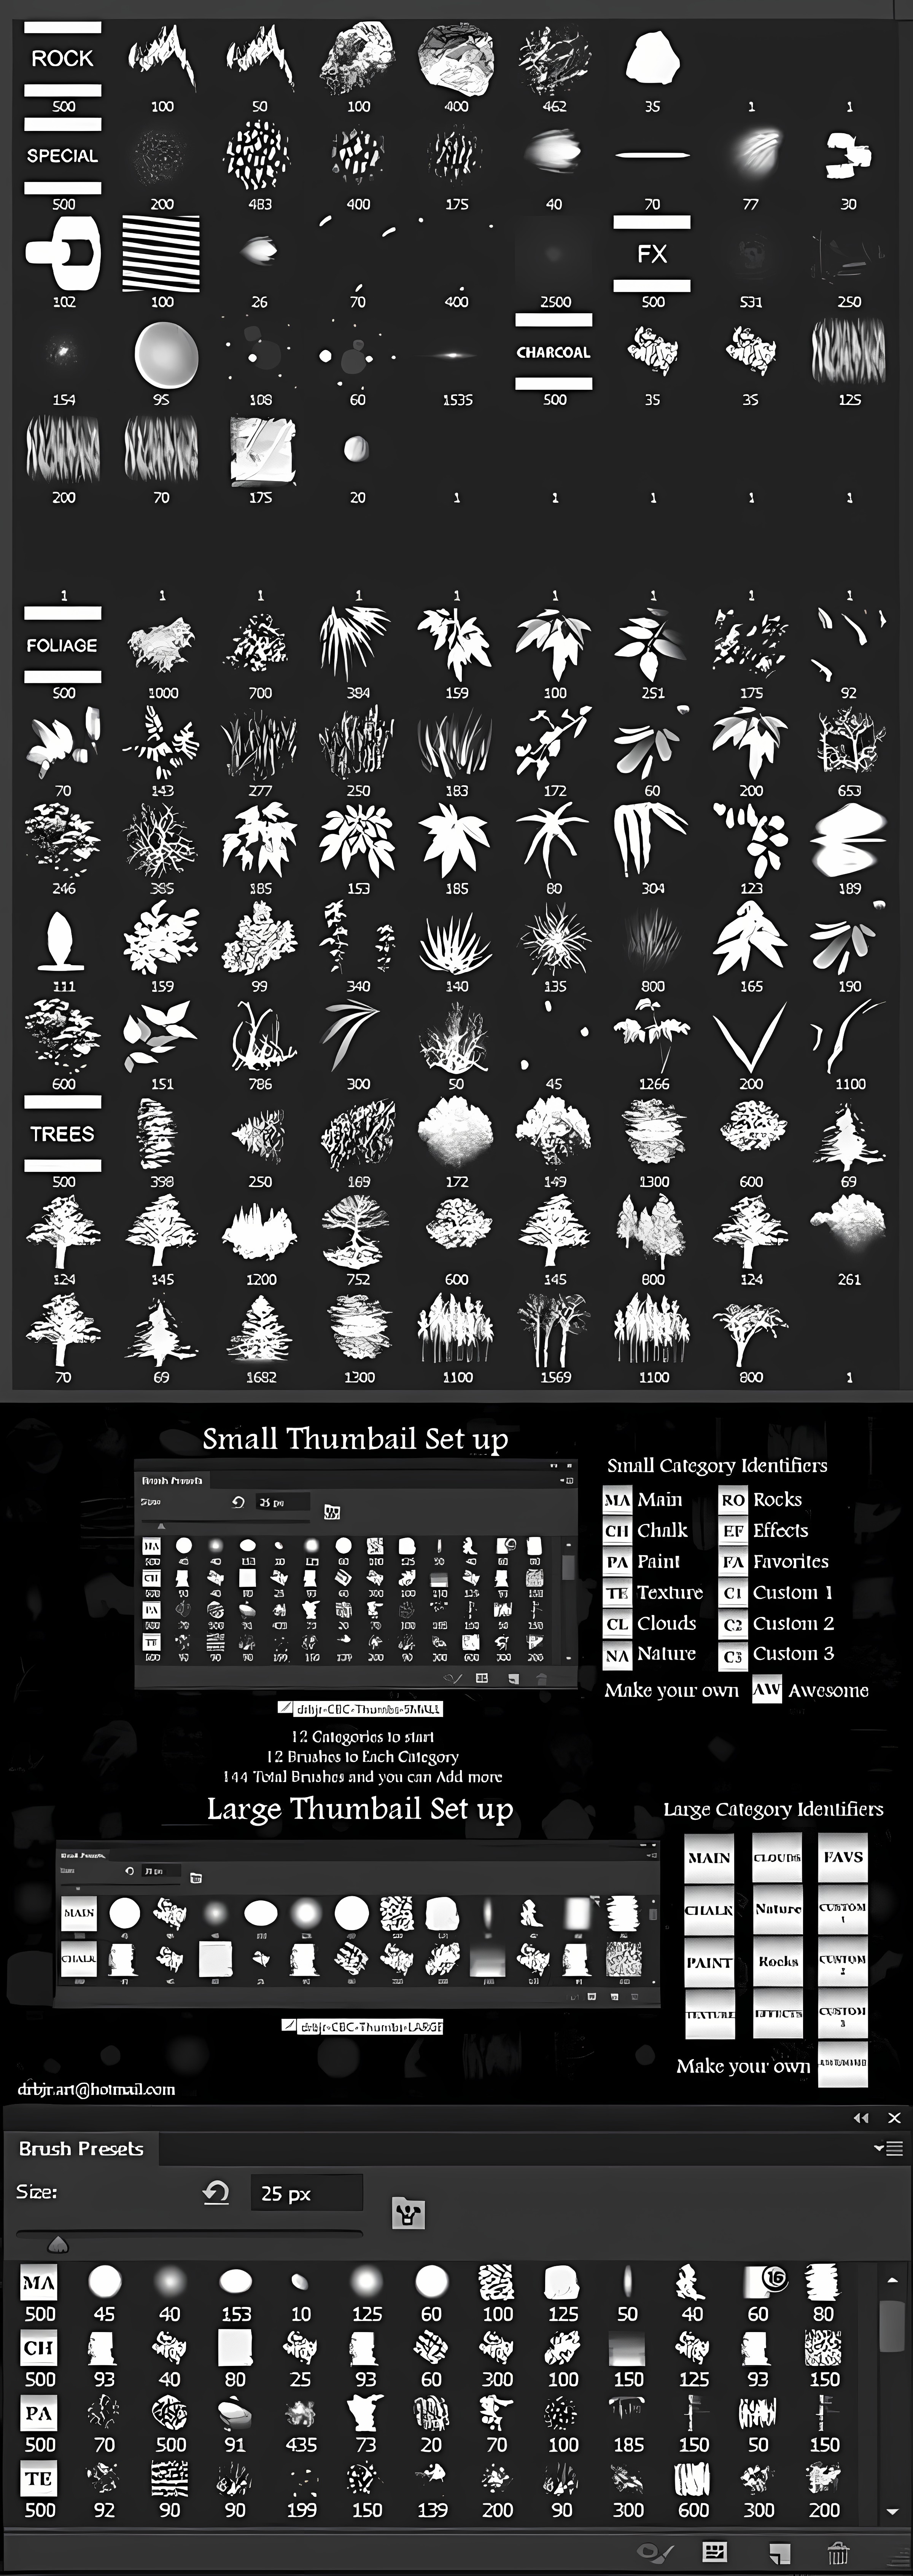 300 Brushes Collection For Photoshop-1.jpg